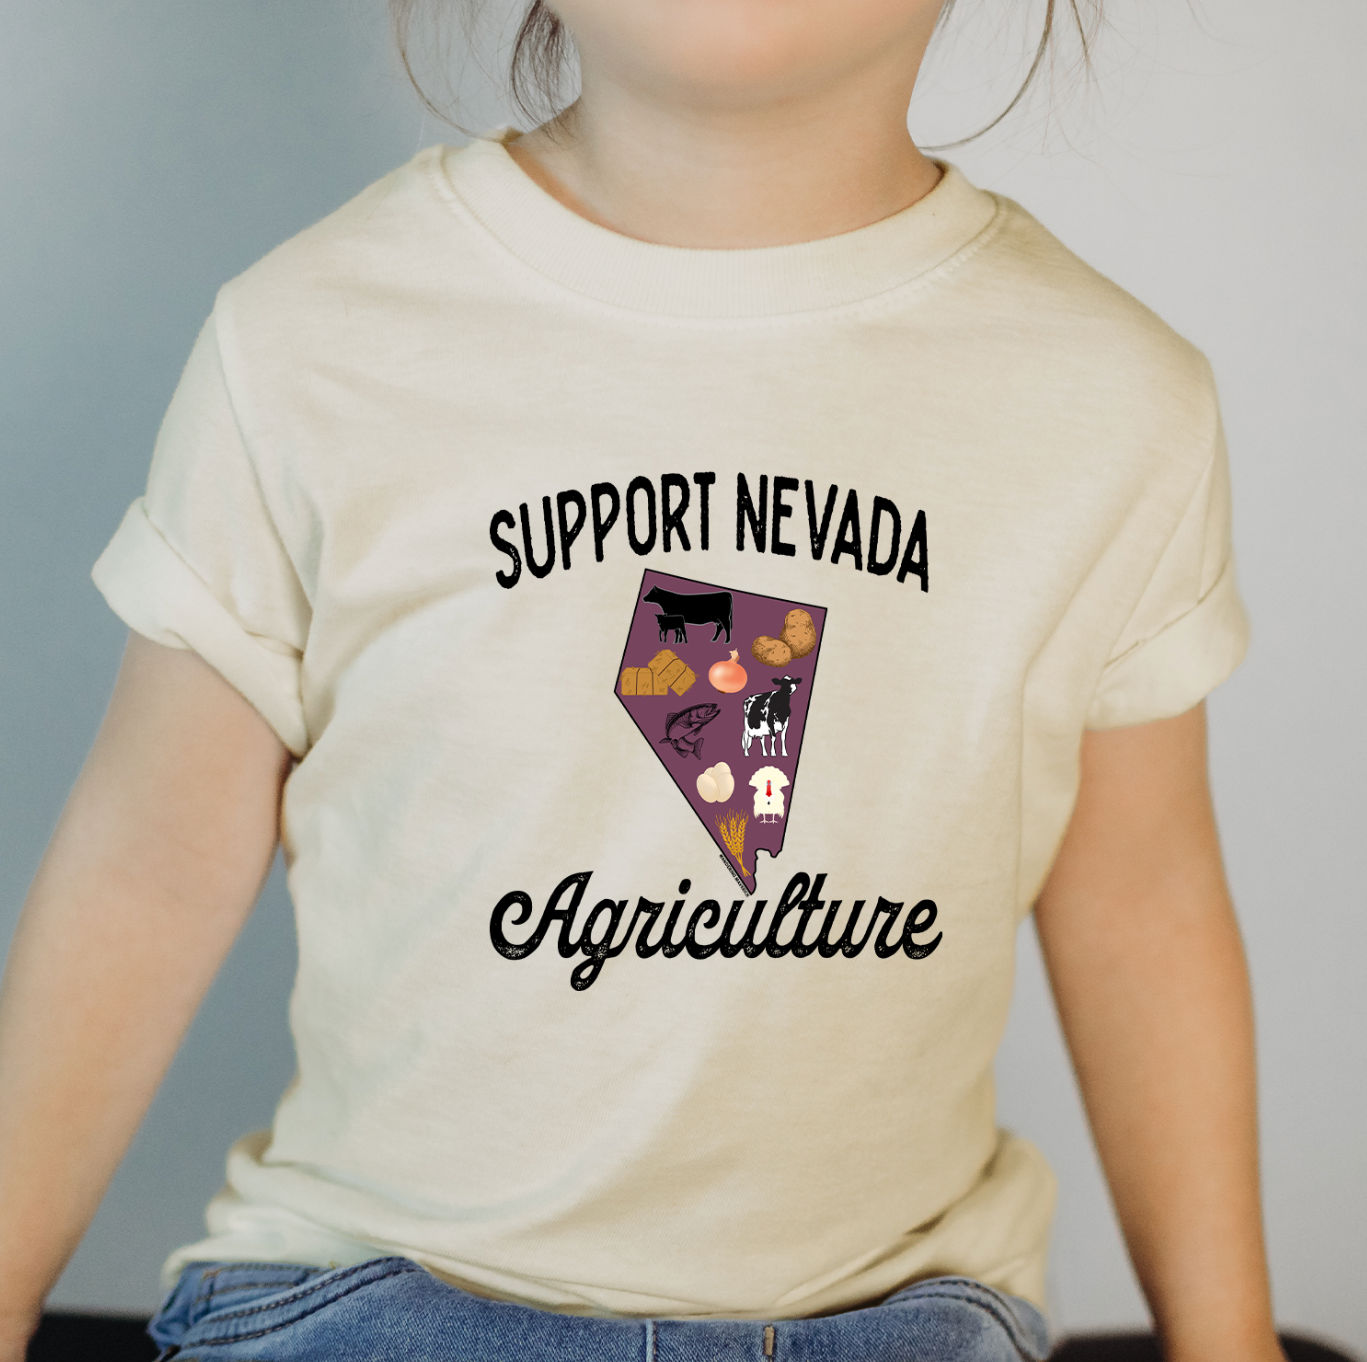 Support Nevada Agriculture One Piece/T-Shirt (Newborn - Youth XL) - Multiple Colors!